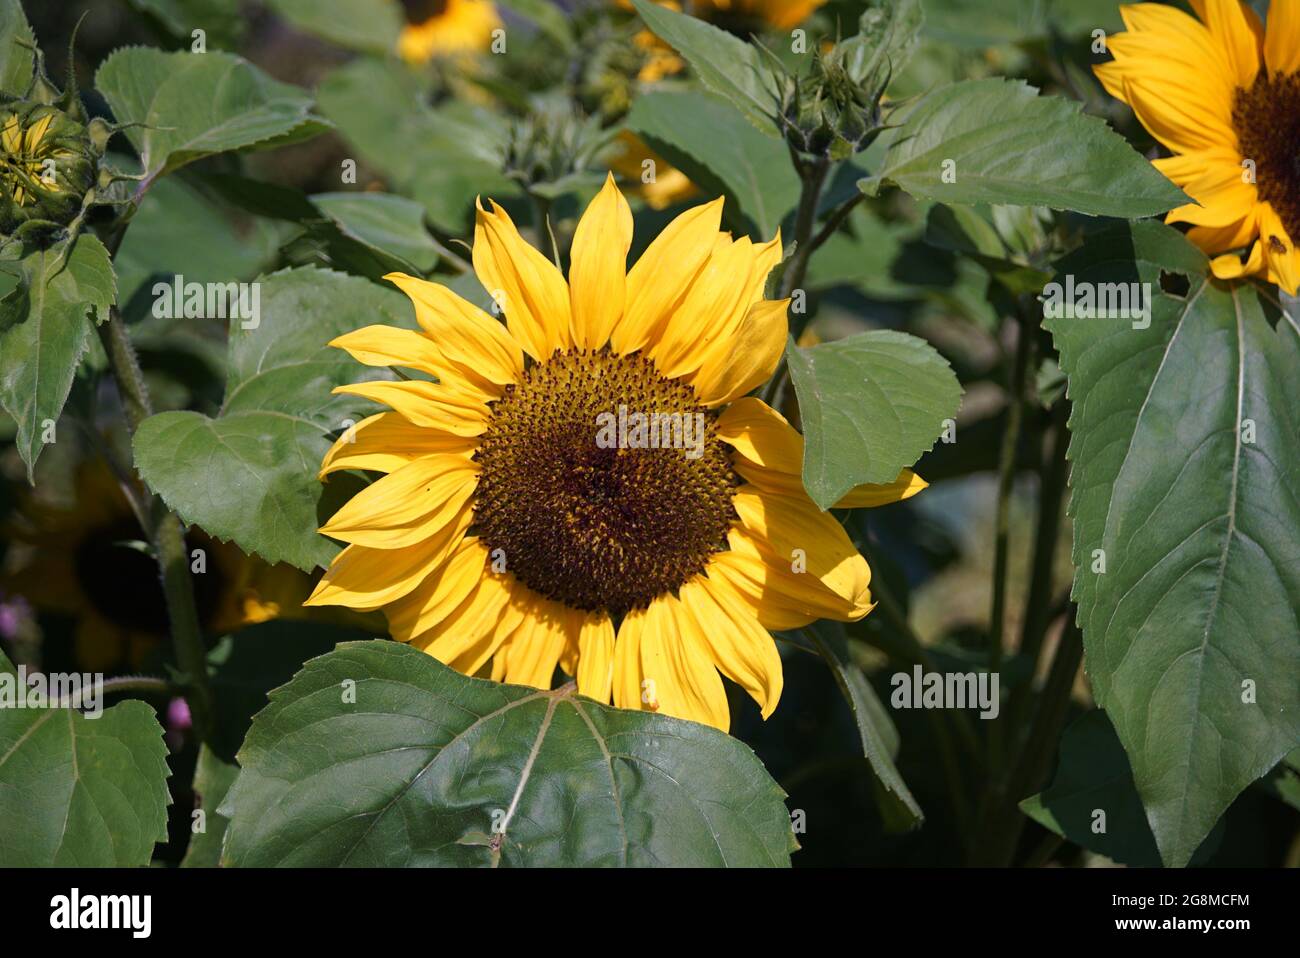 flowers and other plants growing in the spring sunlight Stock Photo